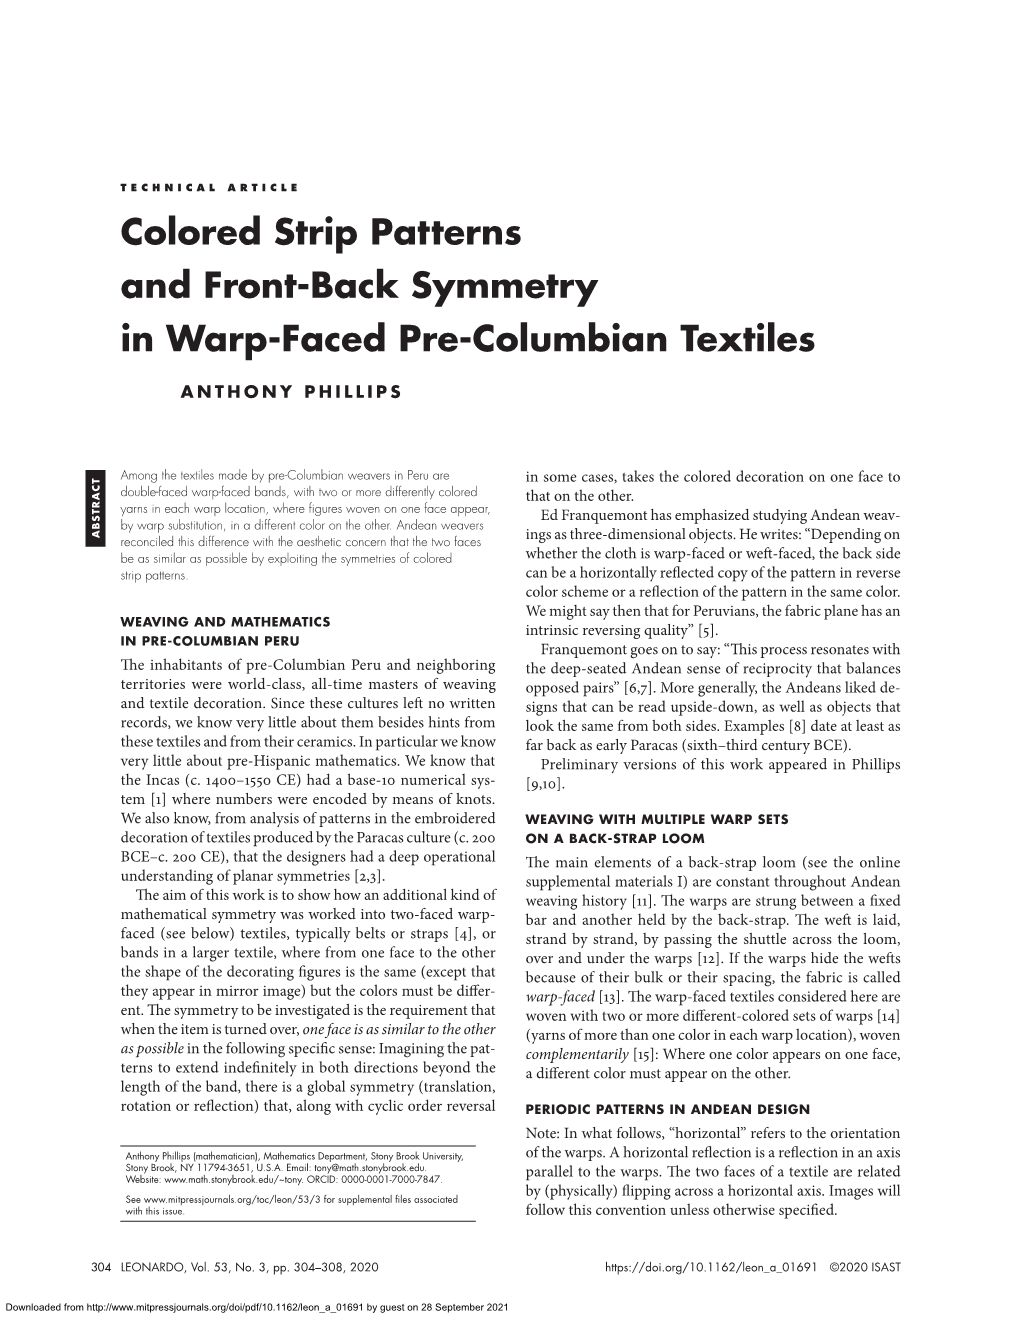 Colored Strip Patterns and Front-Back Symmetry in Warp-Faced Pre-Columbian Textiles 305